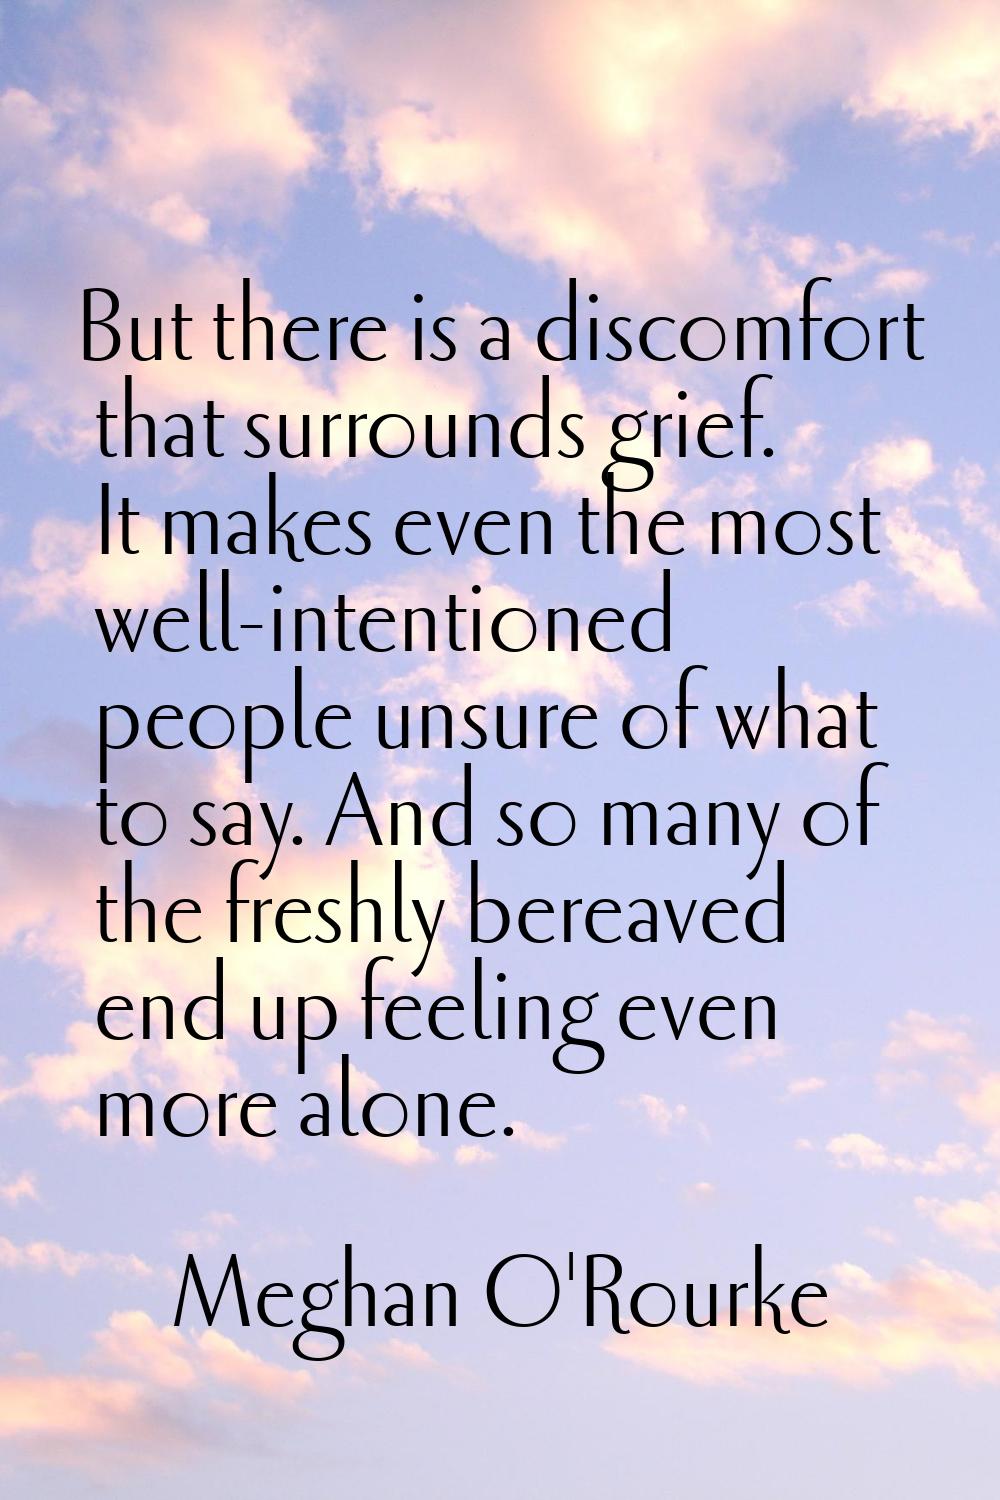 But there is a discomfort that surrounds grief. It makes even the most well-intentioned people unsu